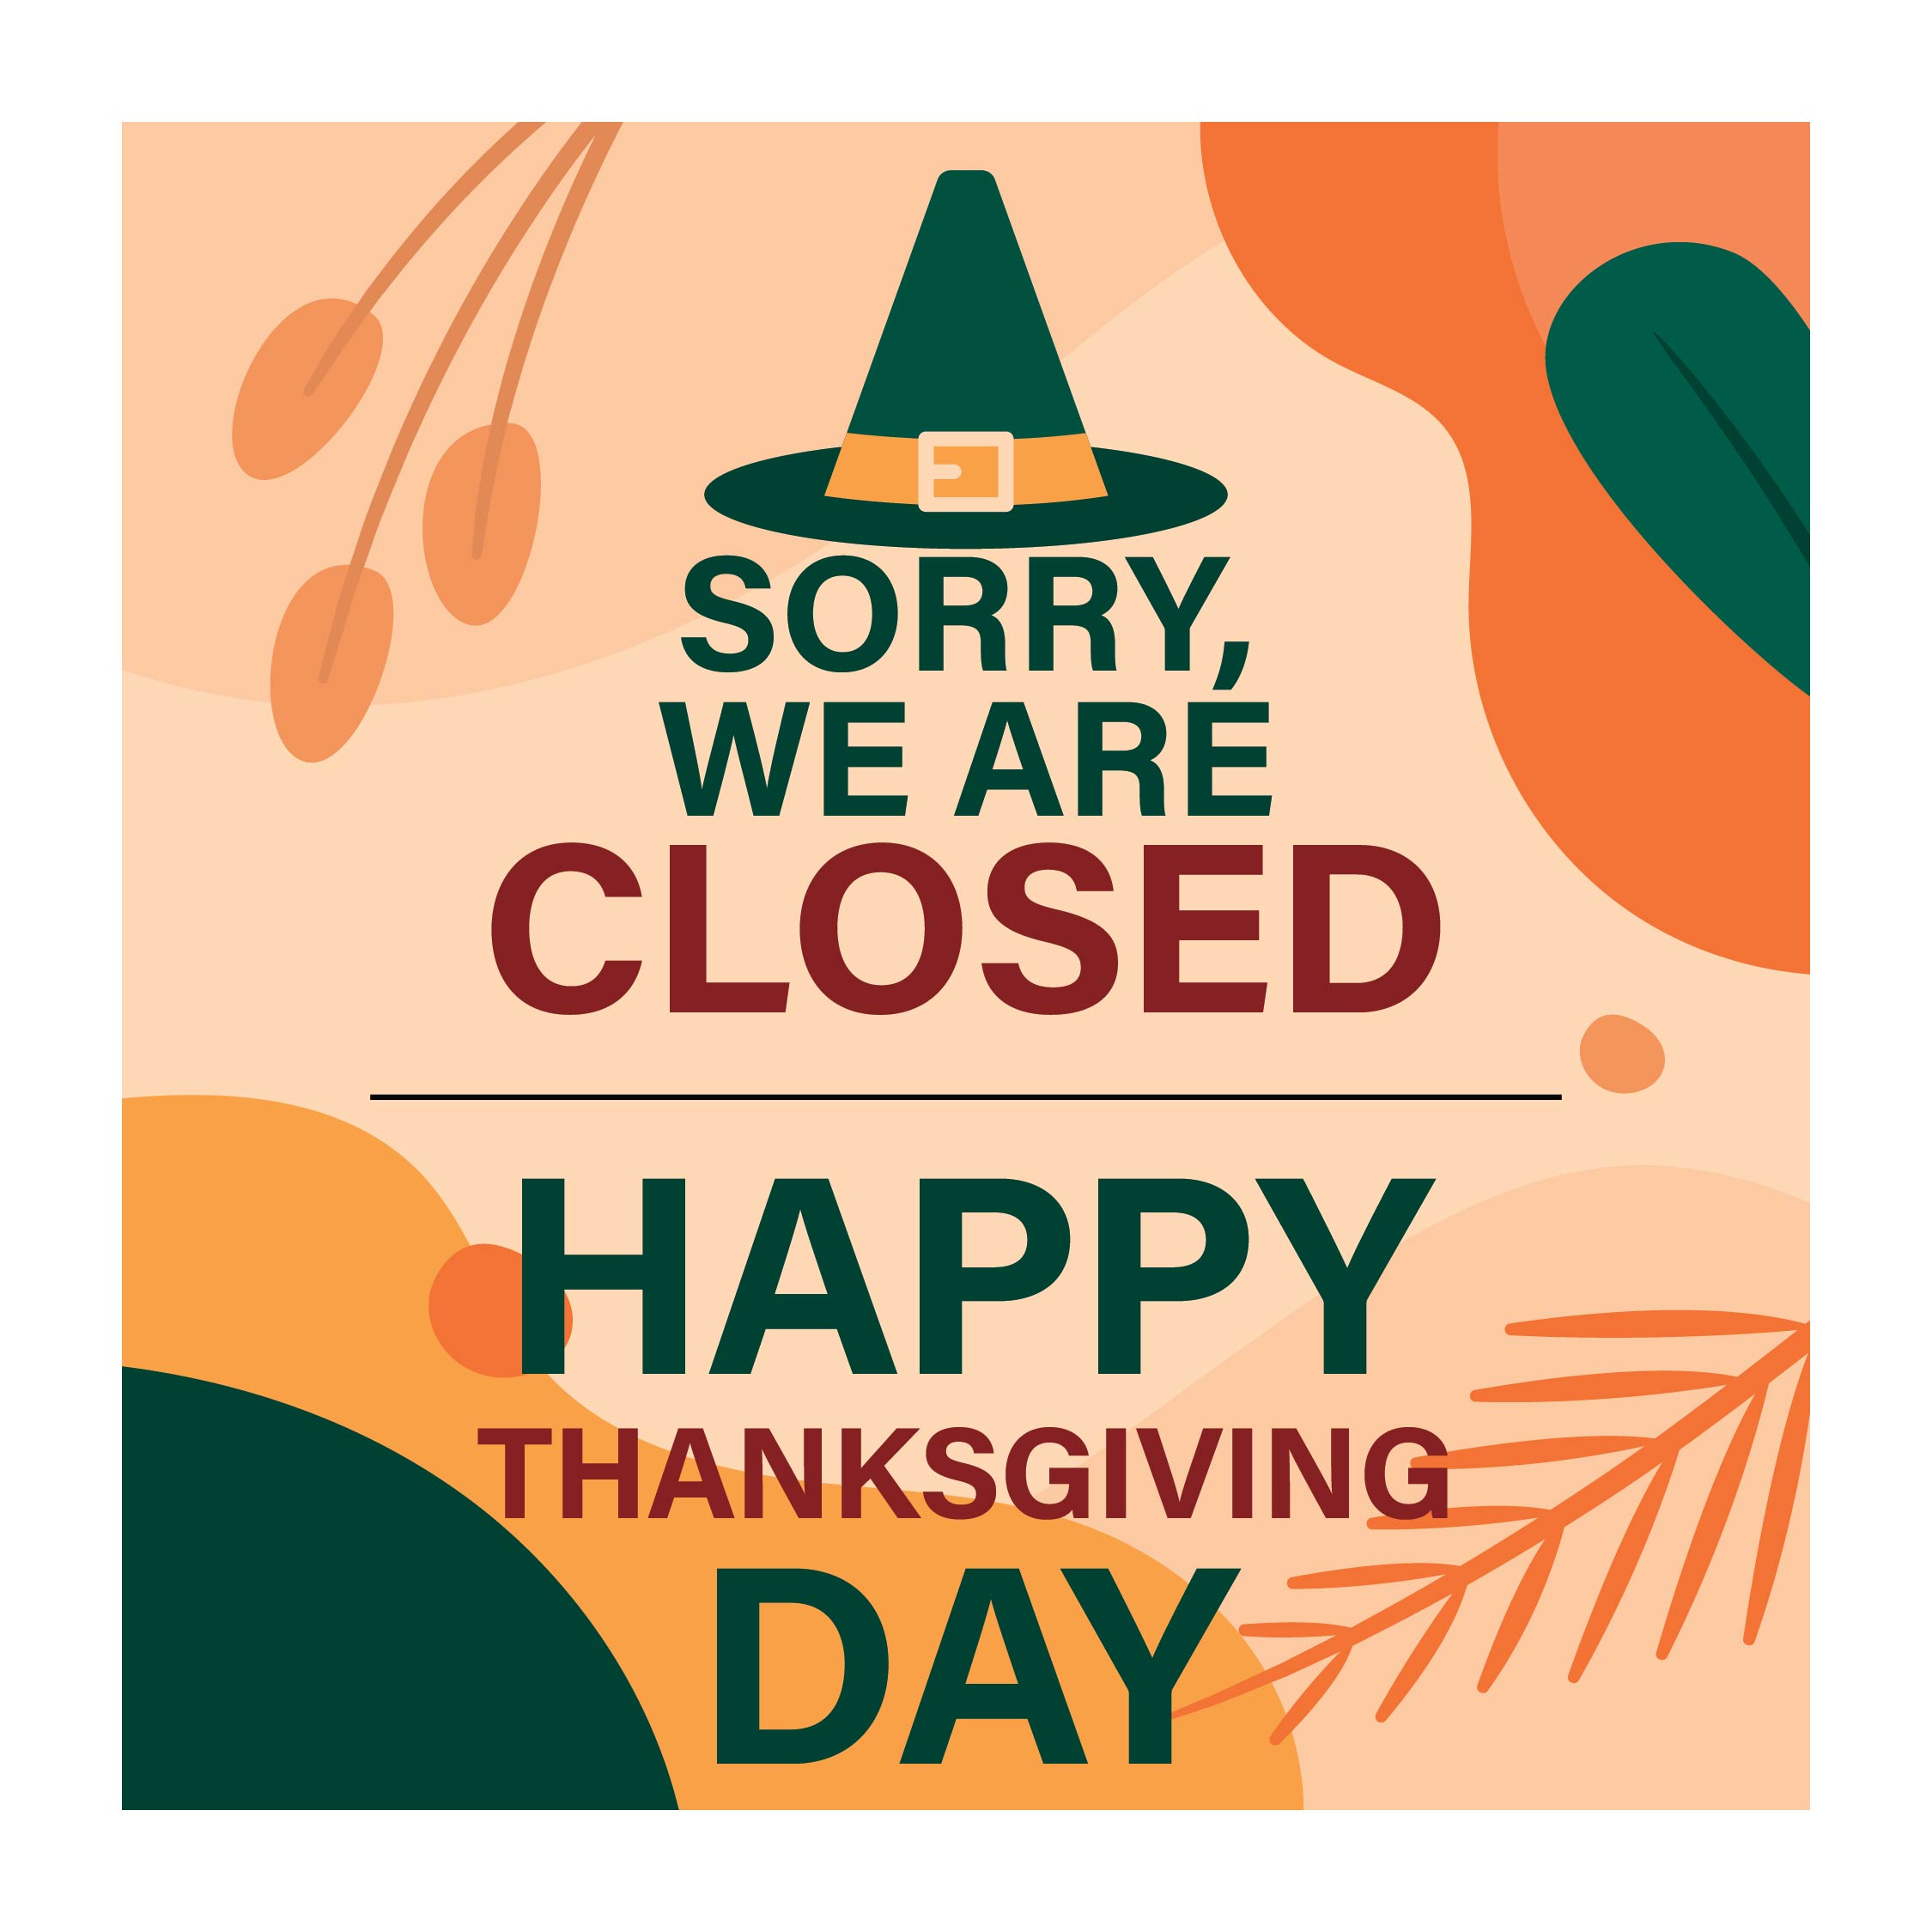 10-best-closed-for-thanksgiving-printables-pdf-for-free-at-printablee